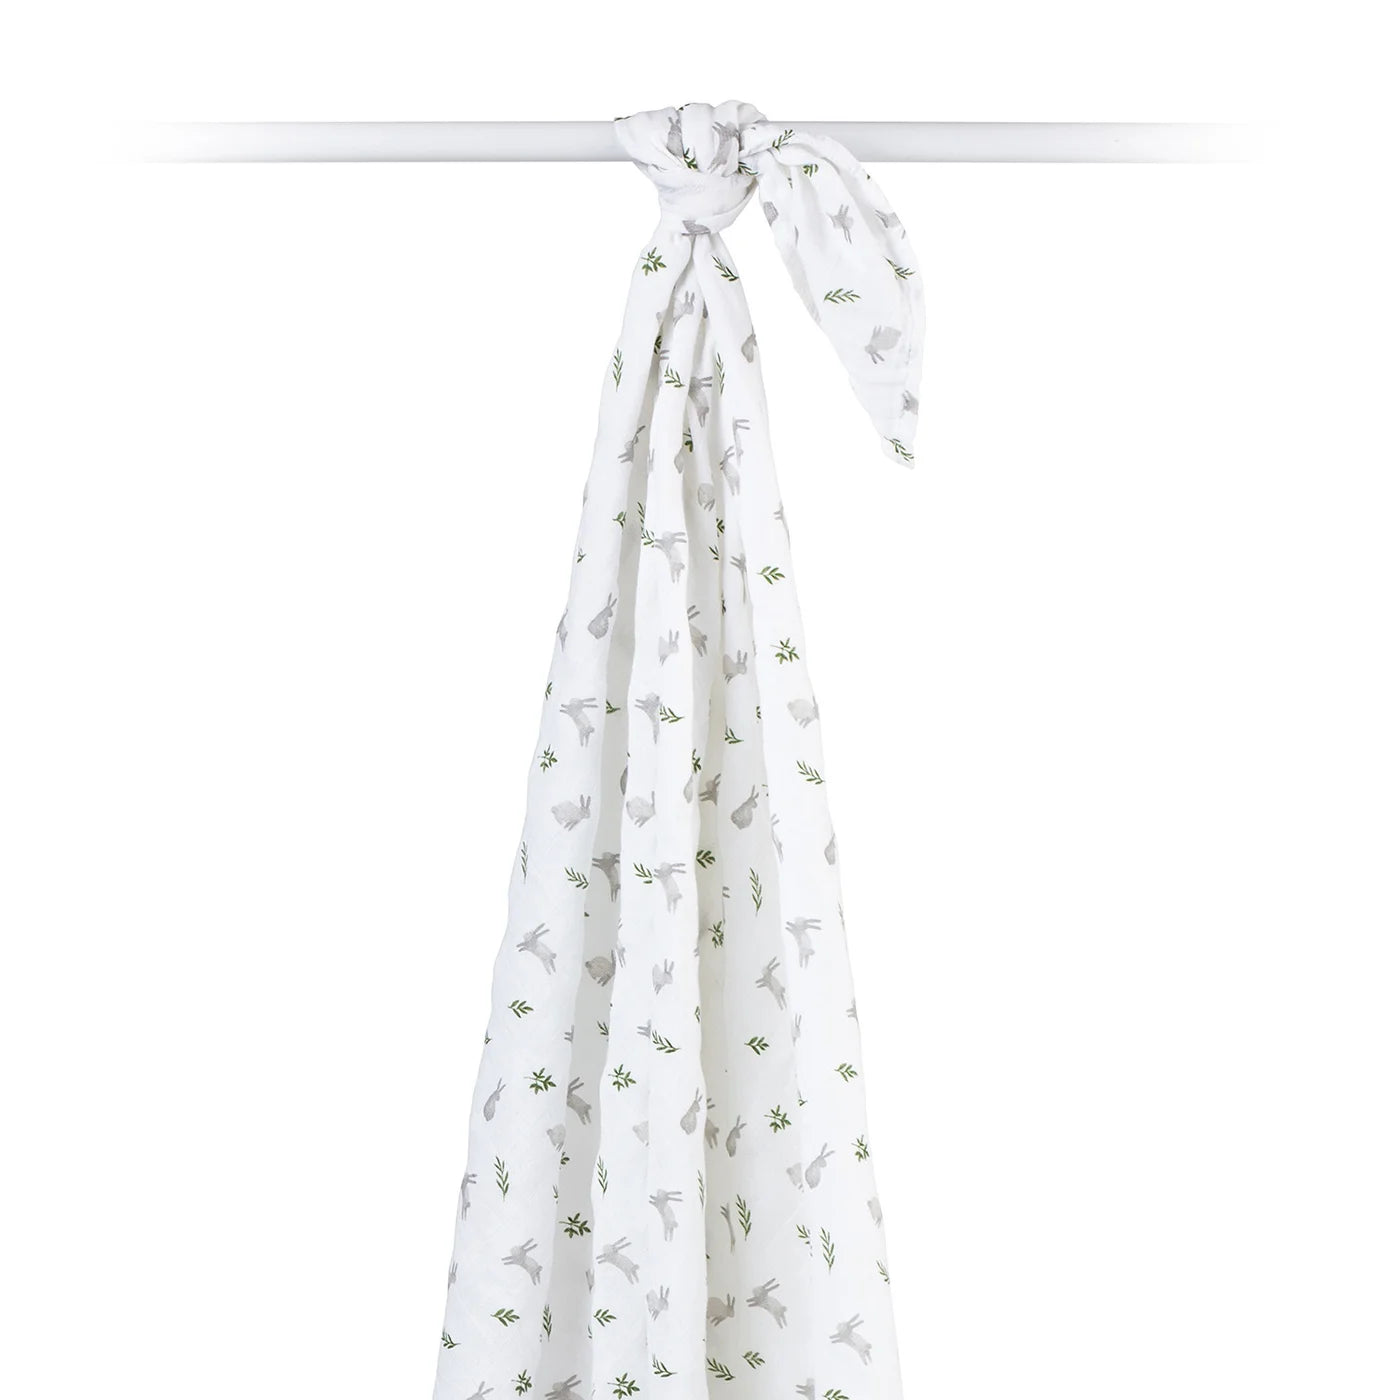 bunnies | muslin cotton large swaddle